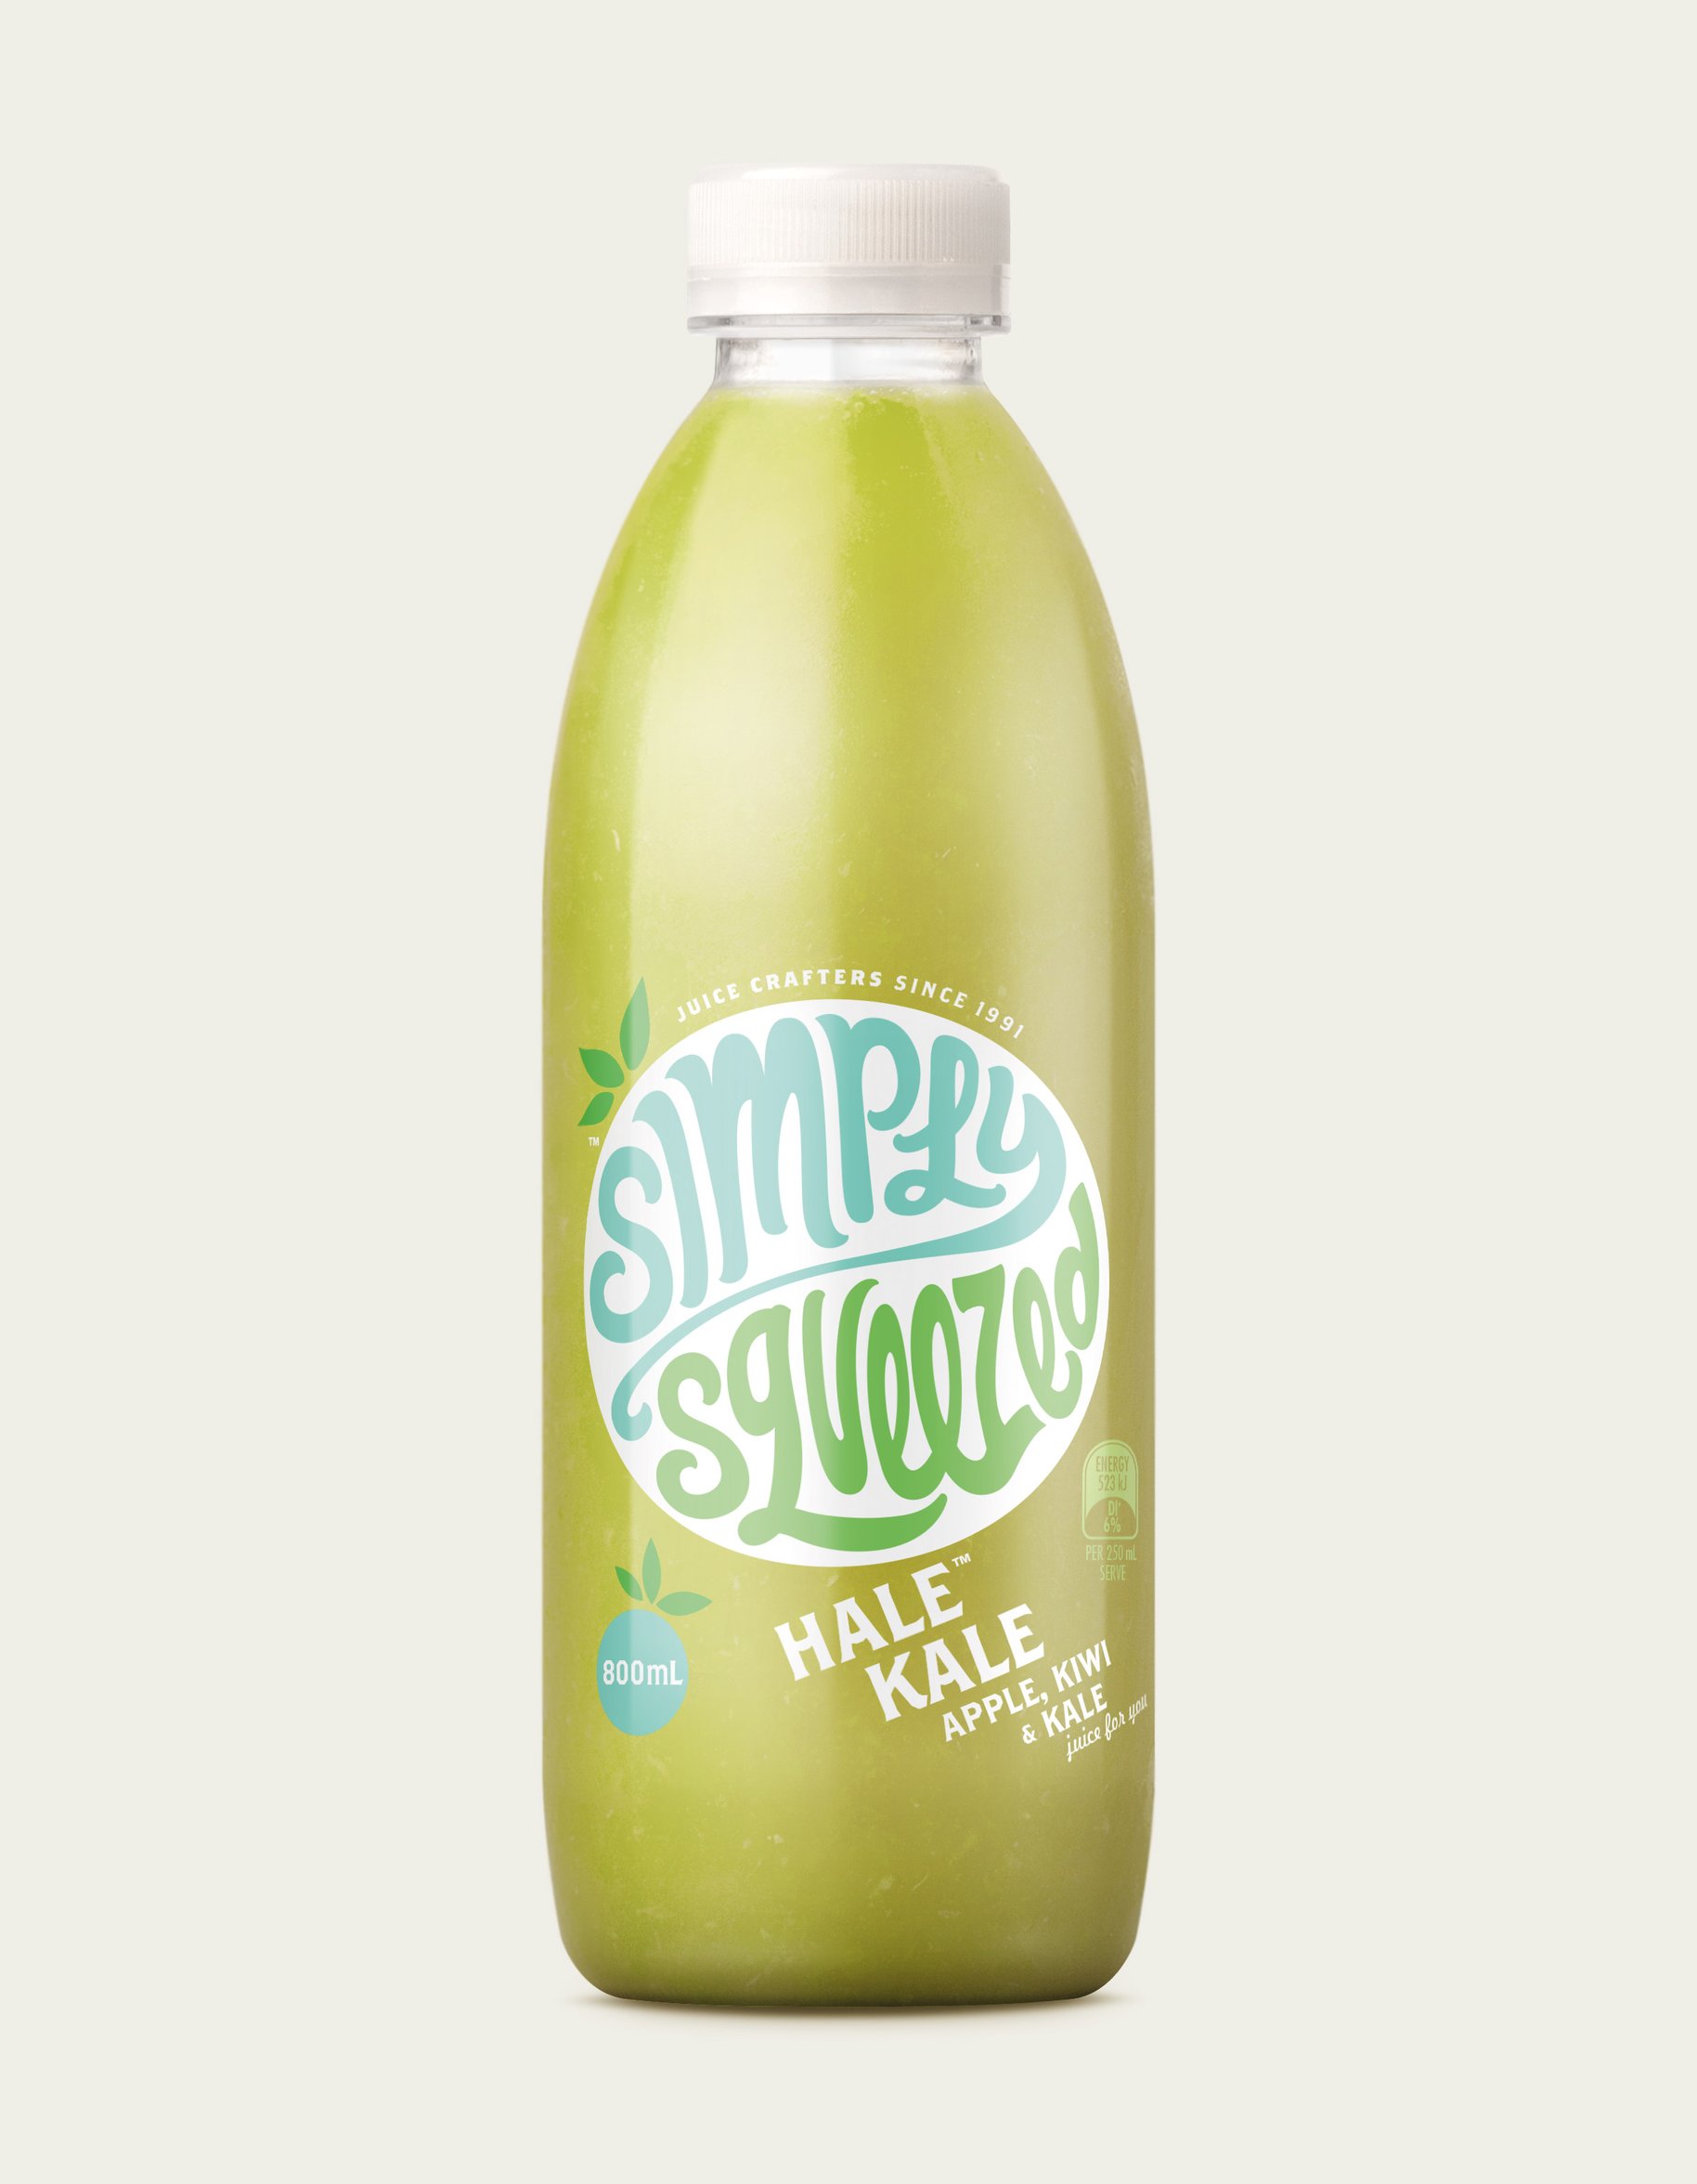 Simply Squeezed Kale Juice Packaging Design 